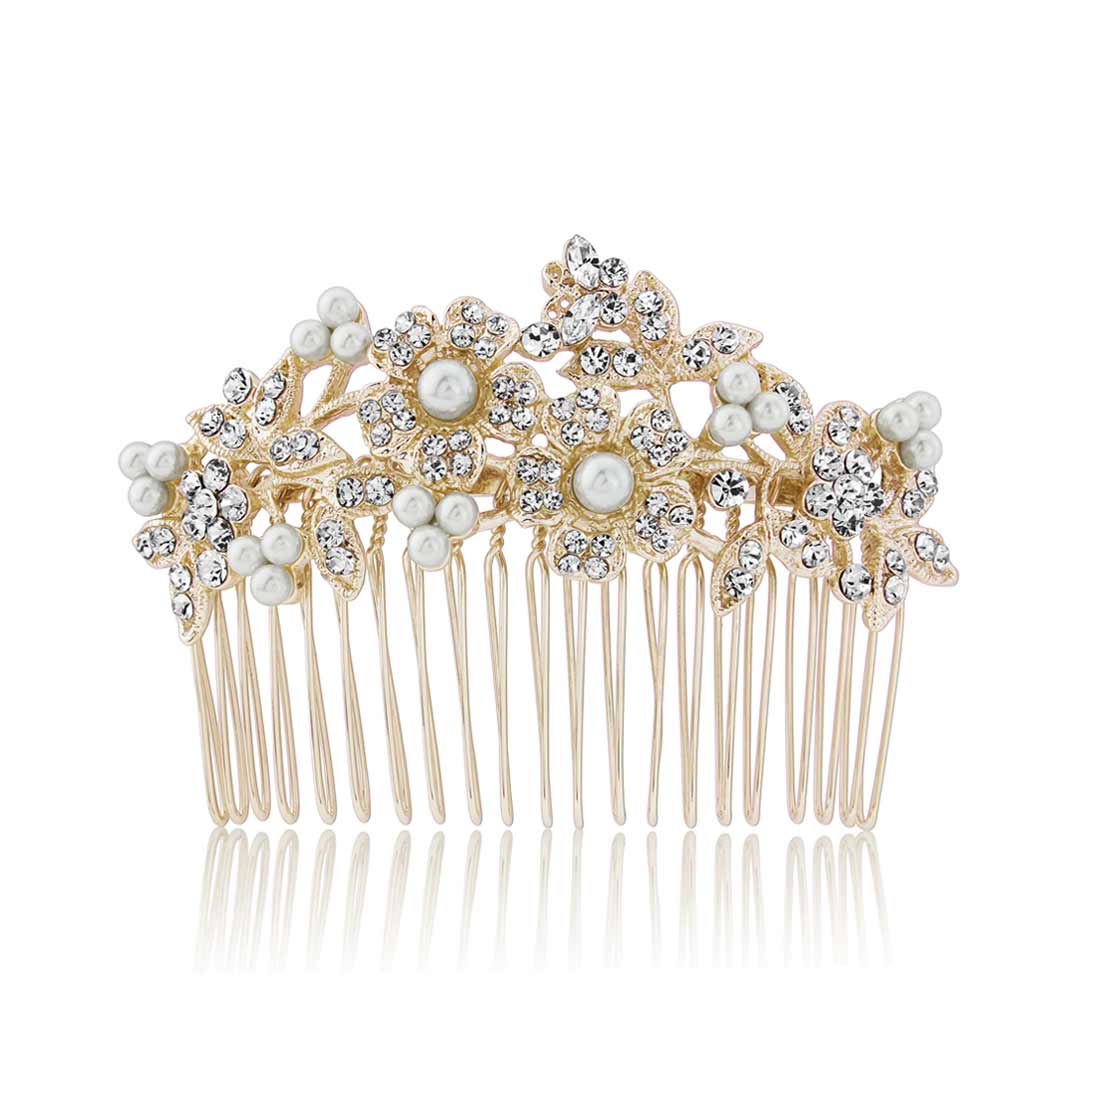 Bouquet of Gold Crystal & Pearl Hair Comb for Brides, Weddings & Occasions